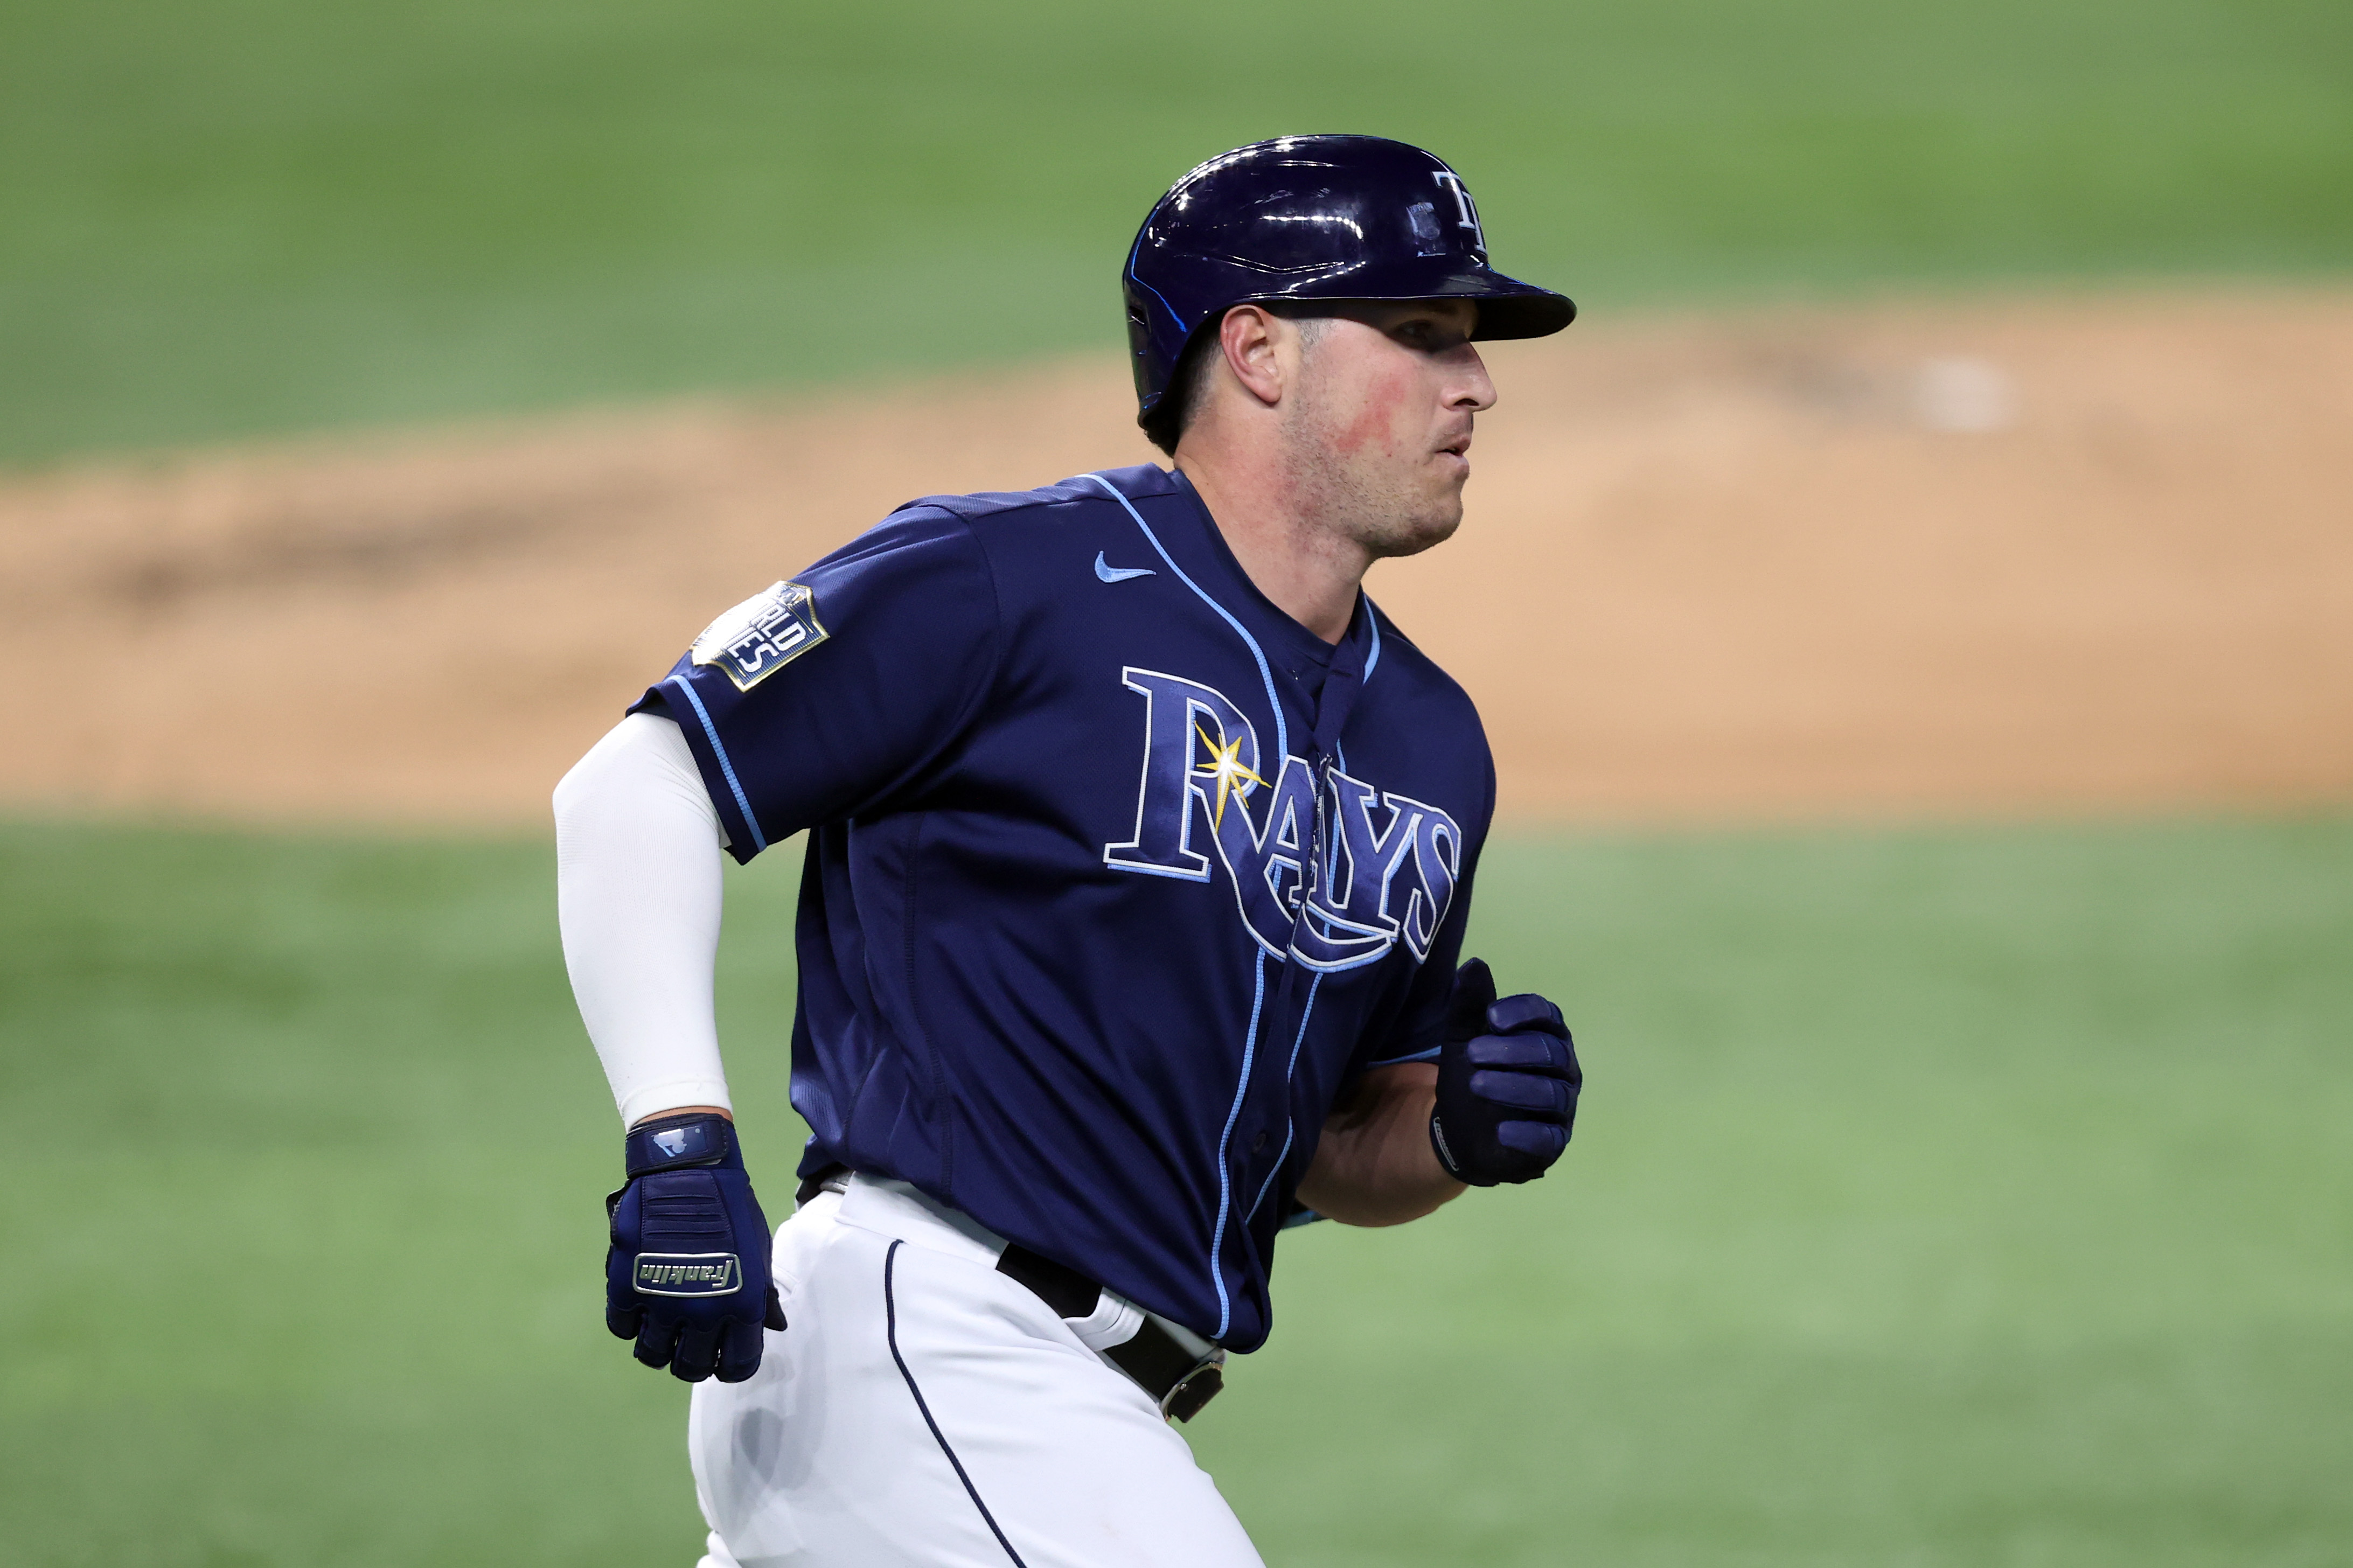 Hunter Renfroe joins the list of Red Sox one-year wonders